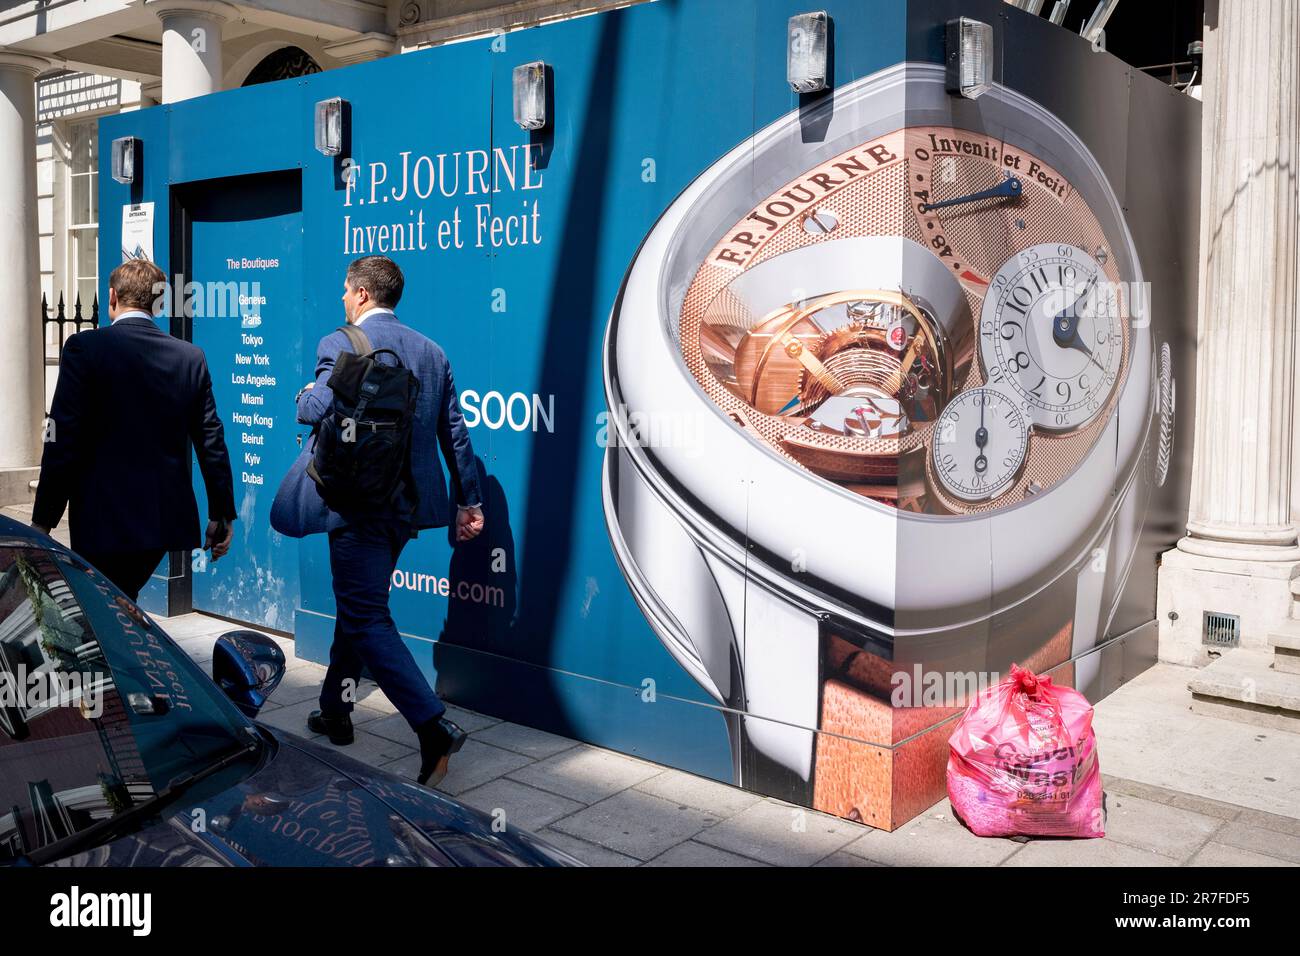 Pedestrians walk past a temporary construction hoarding for the new premises of horologist and watch manufacturer, FP Journe, in Mayfair on 15th June 2023, in London, England. The watch-maker's Latin brand identity is 'Invenit et Fecit', meaning 'invented and made'. Stock Photo